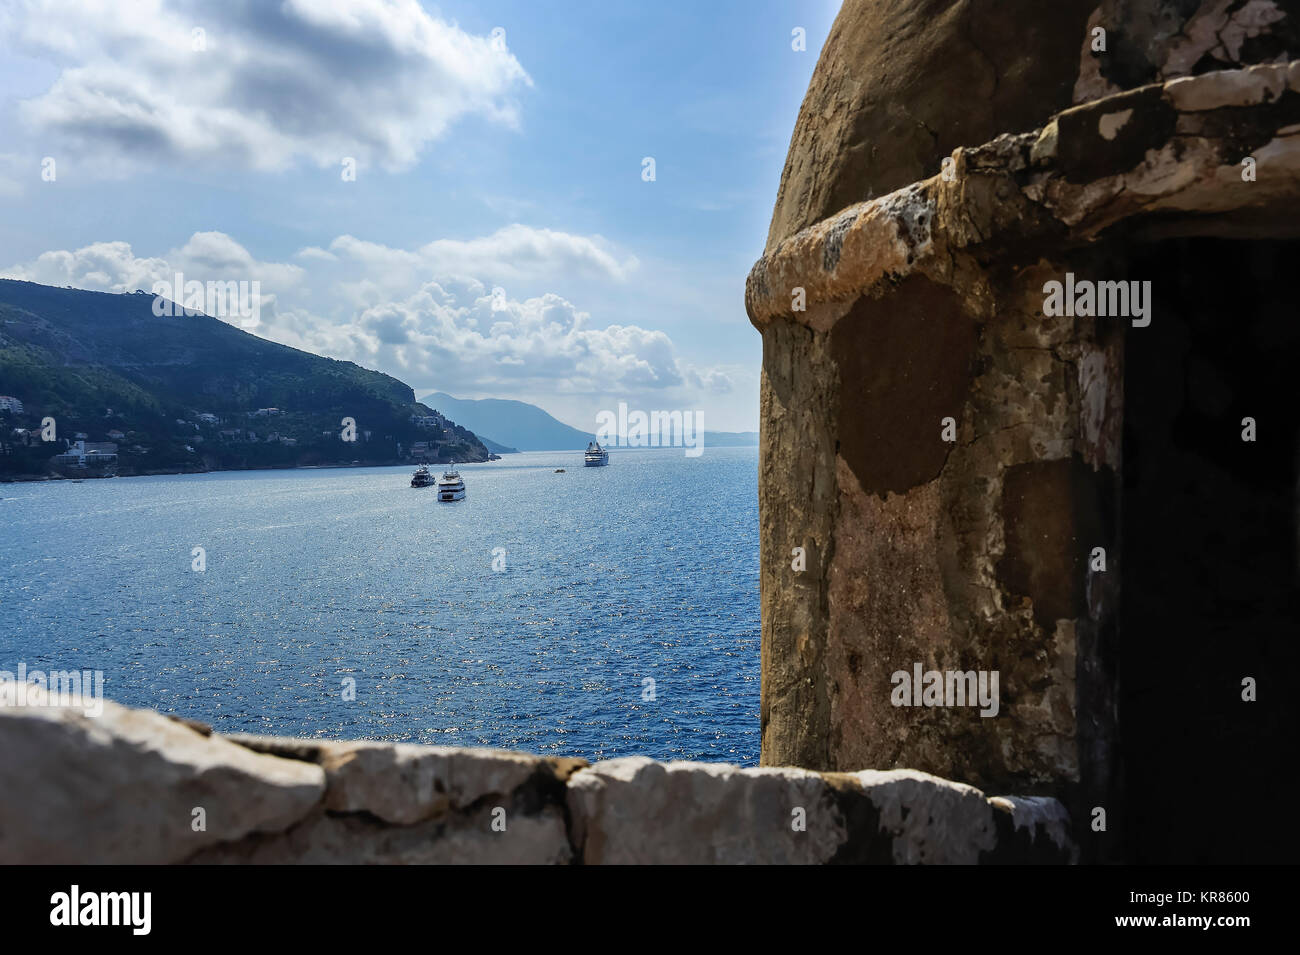 fortress of dubrovnik overlooking the ships off the coast Stock Photo